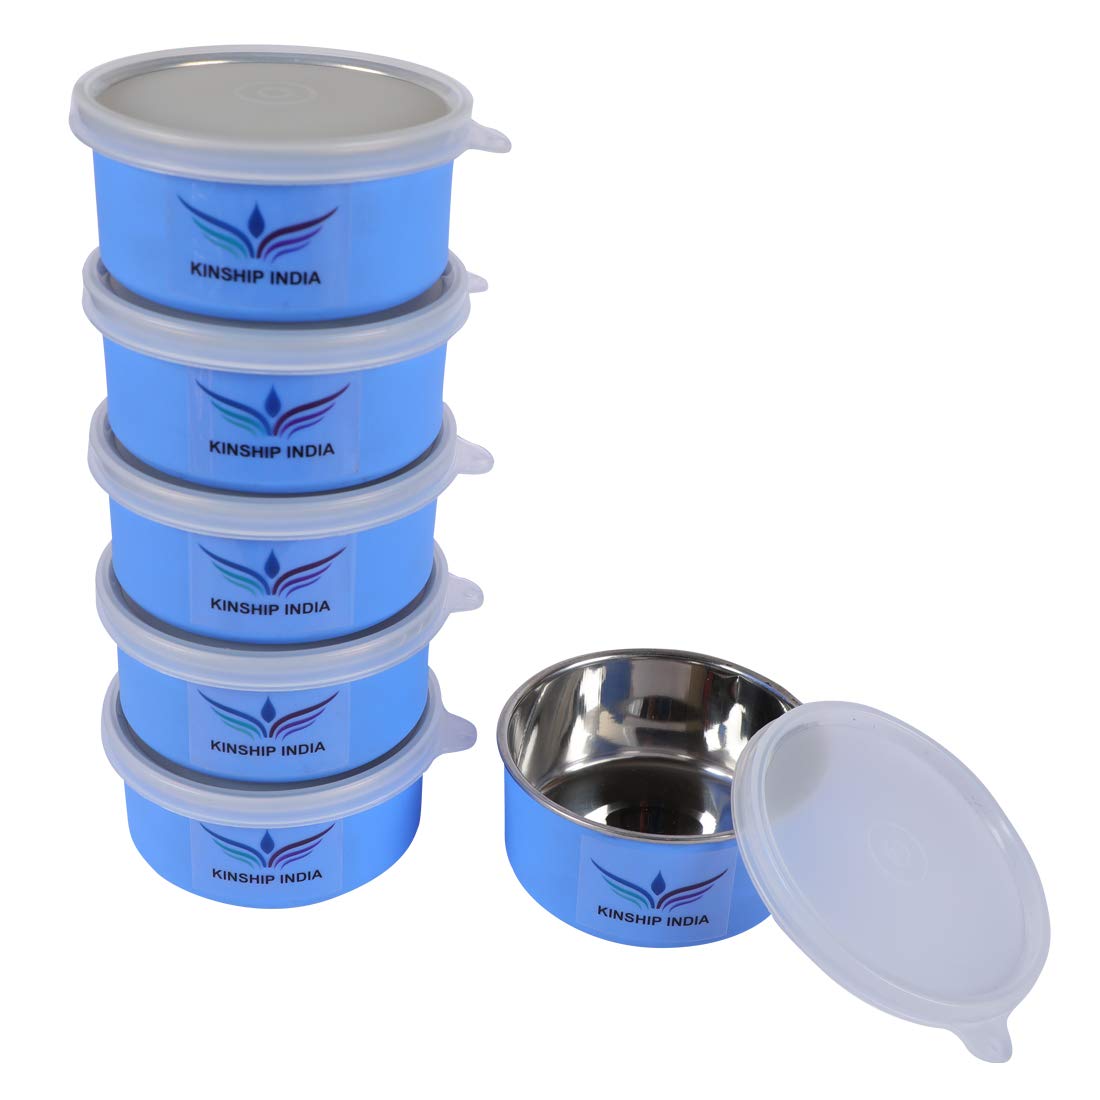 Microwave Safe Stainless Steel Small Lunch Containers (300 ml)- Set of 6 (Blue)